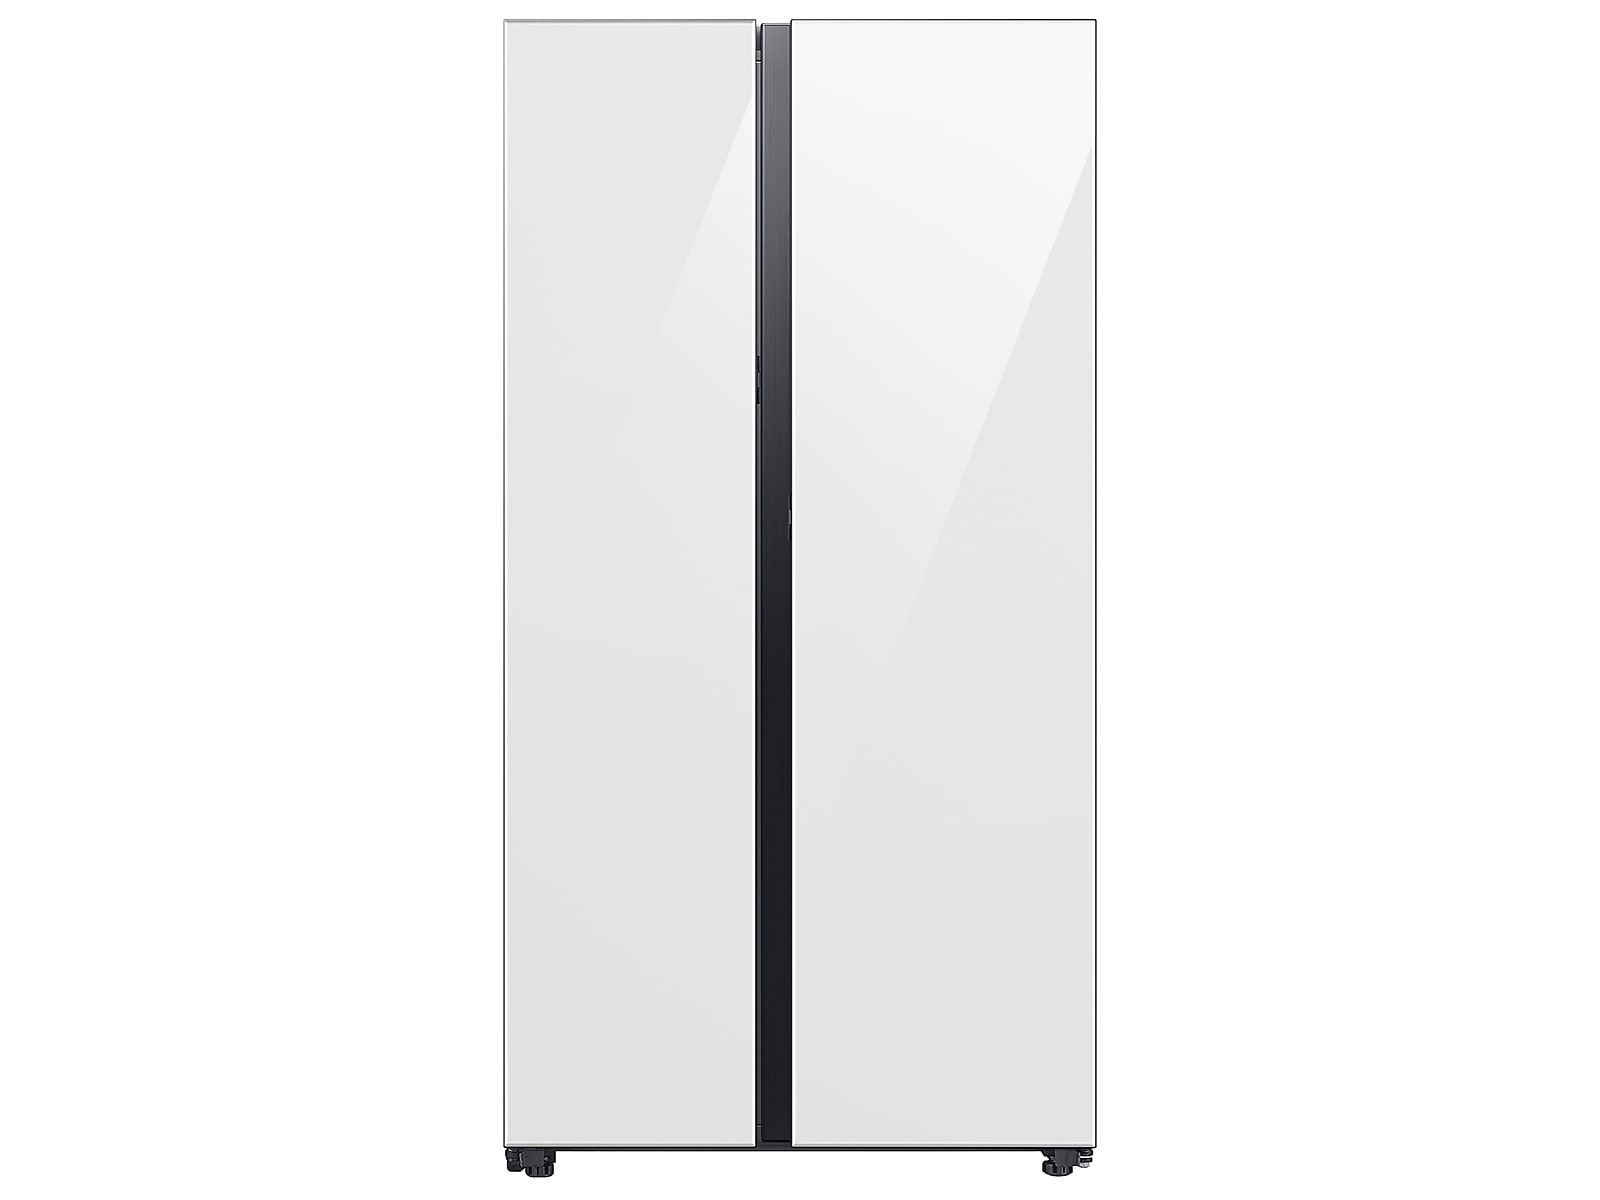 Samsung Bespoke Counter Depth Side-by-Side 23 cu. ft. Refrigerator with Beverage Center™ in White Glass(RS23CB760012AA)